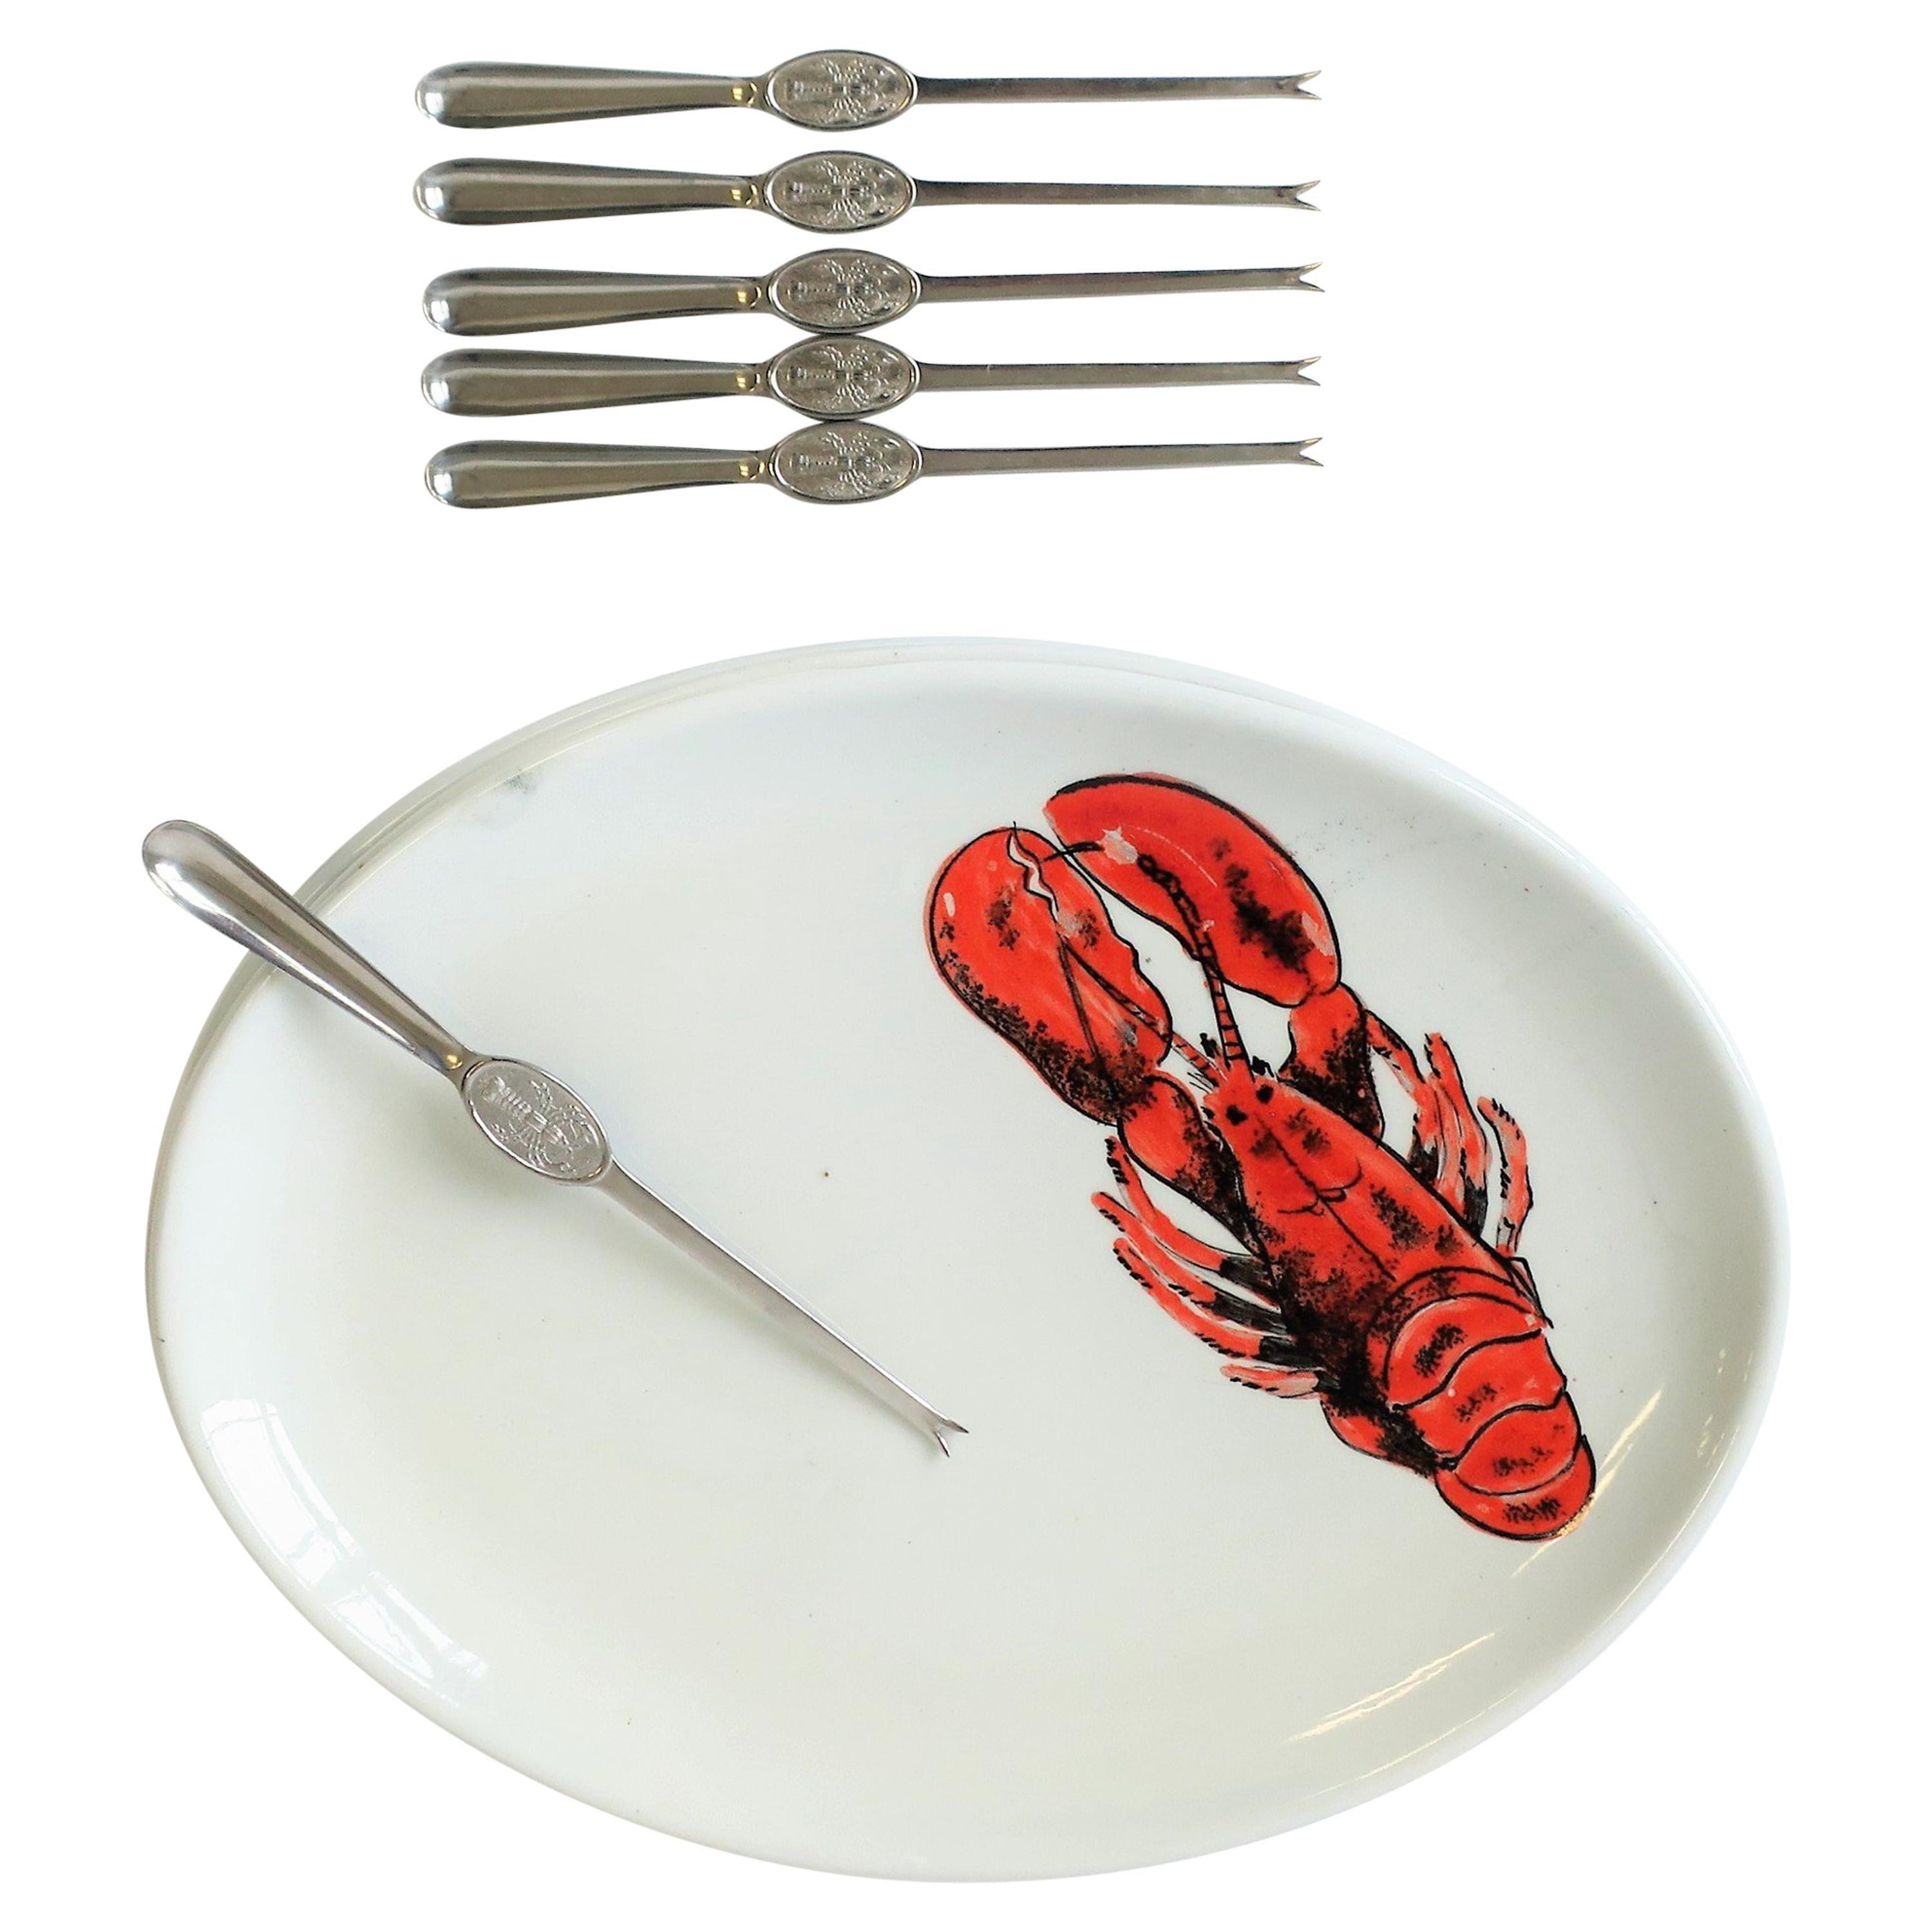 Summer Italian Lobster Dinner Plates with Forks from Sweden, Set of 6